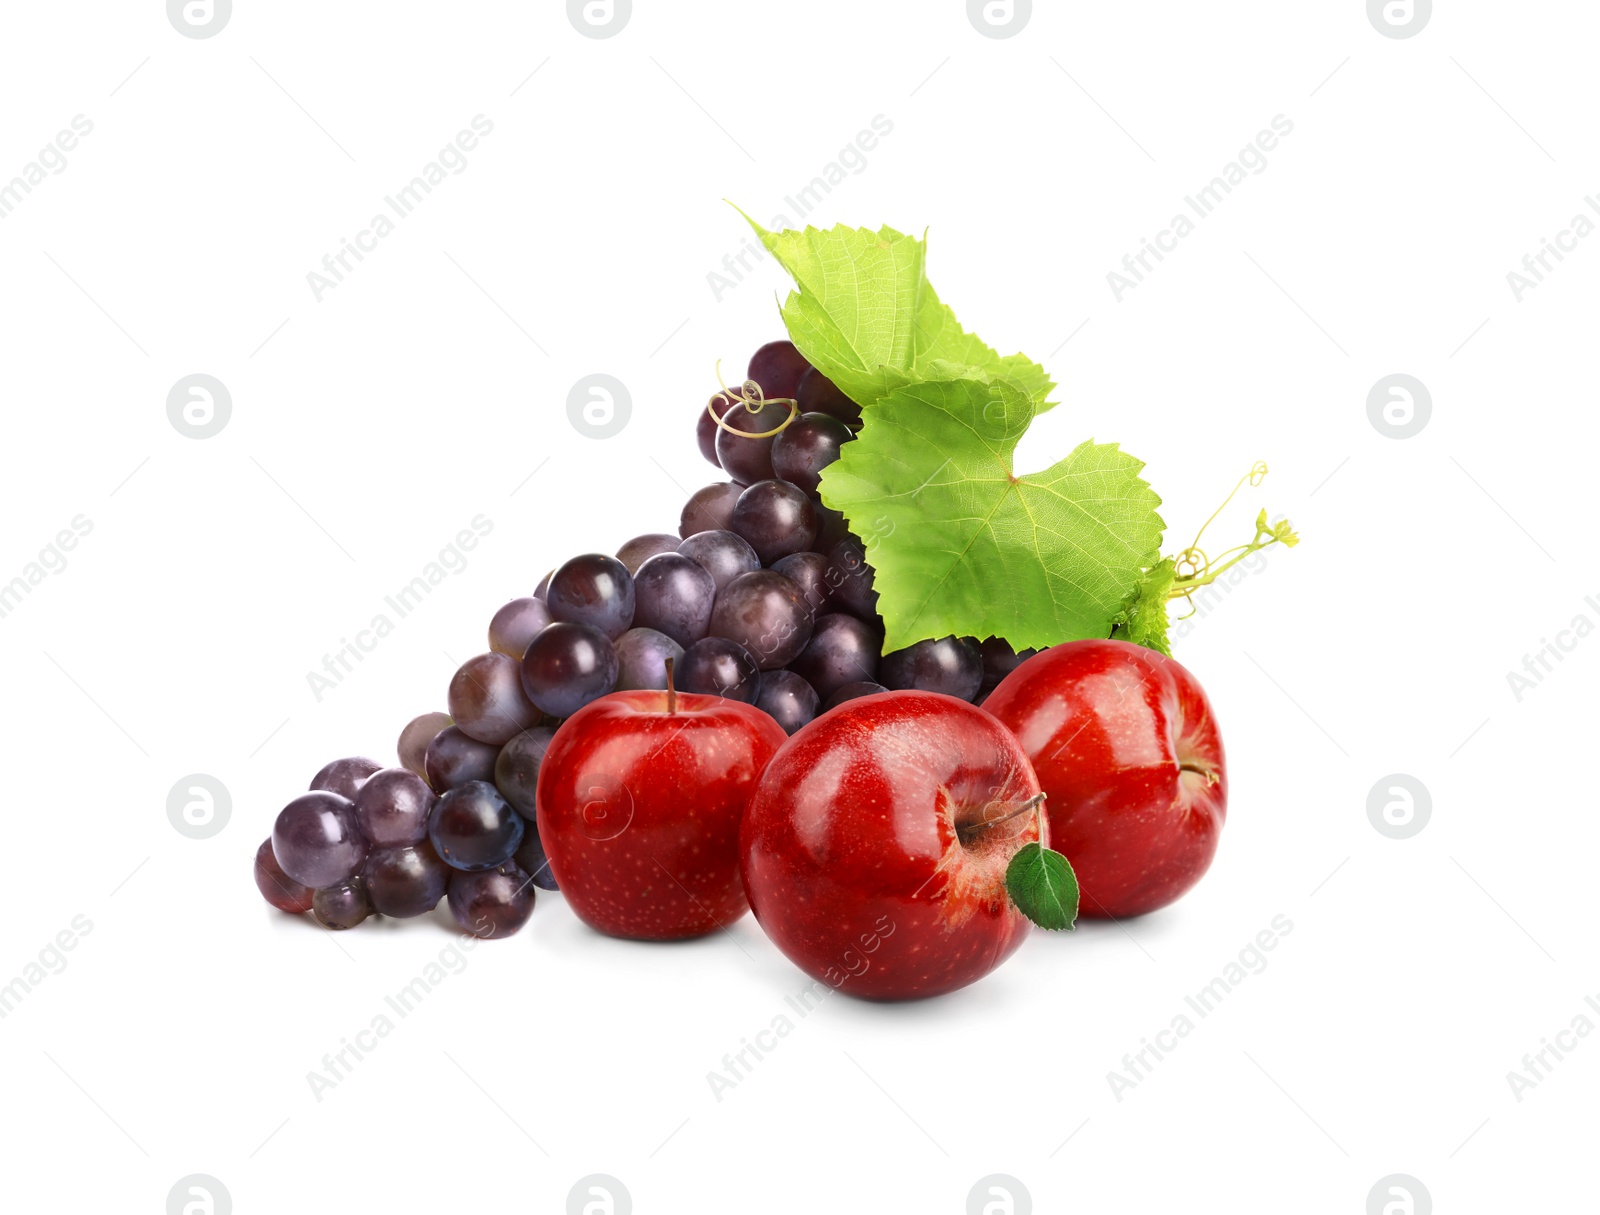 Image of Ripe juicy grapes and apples on white background